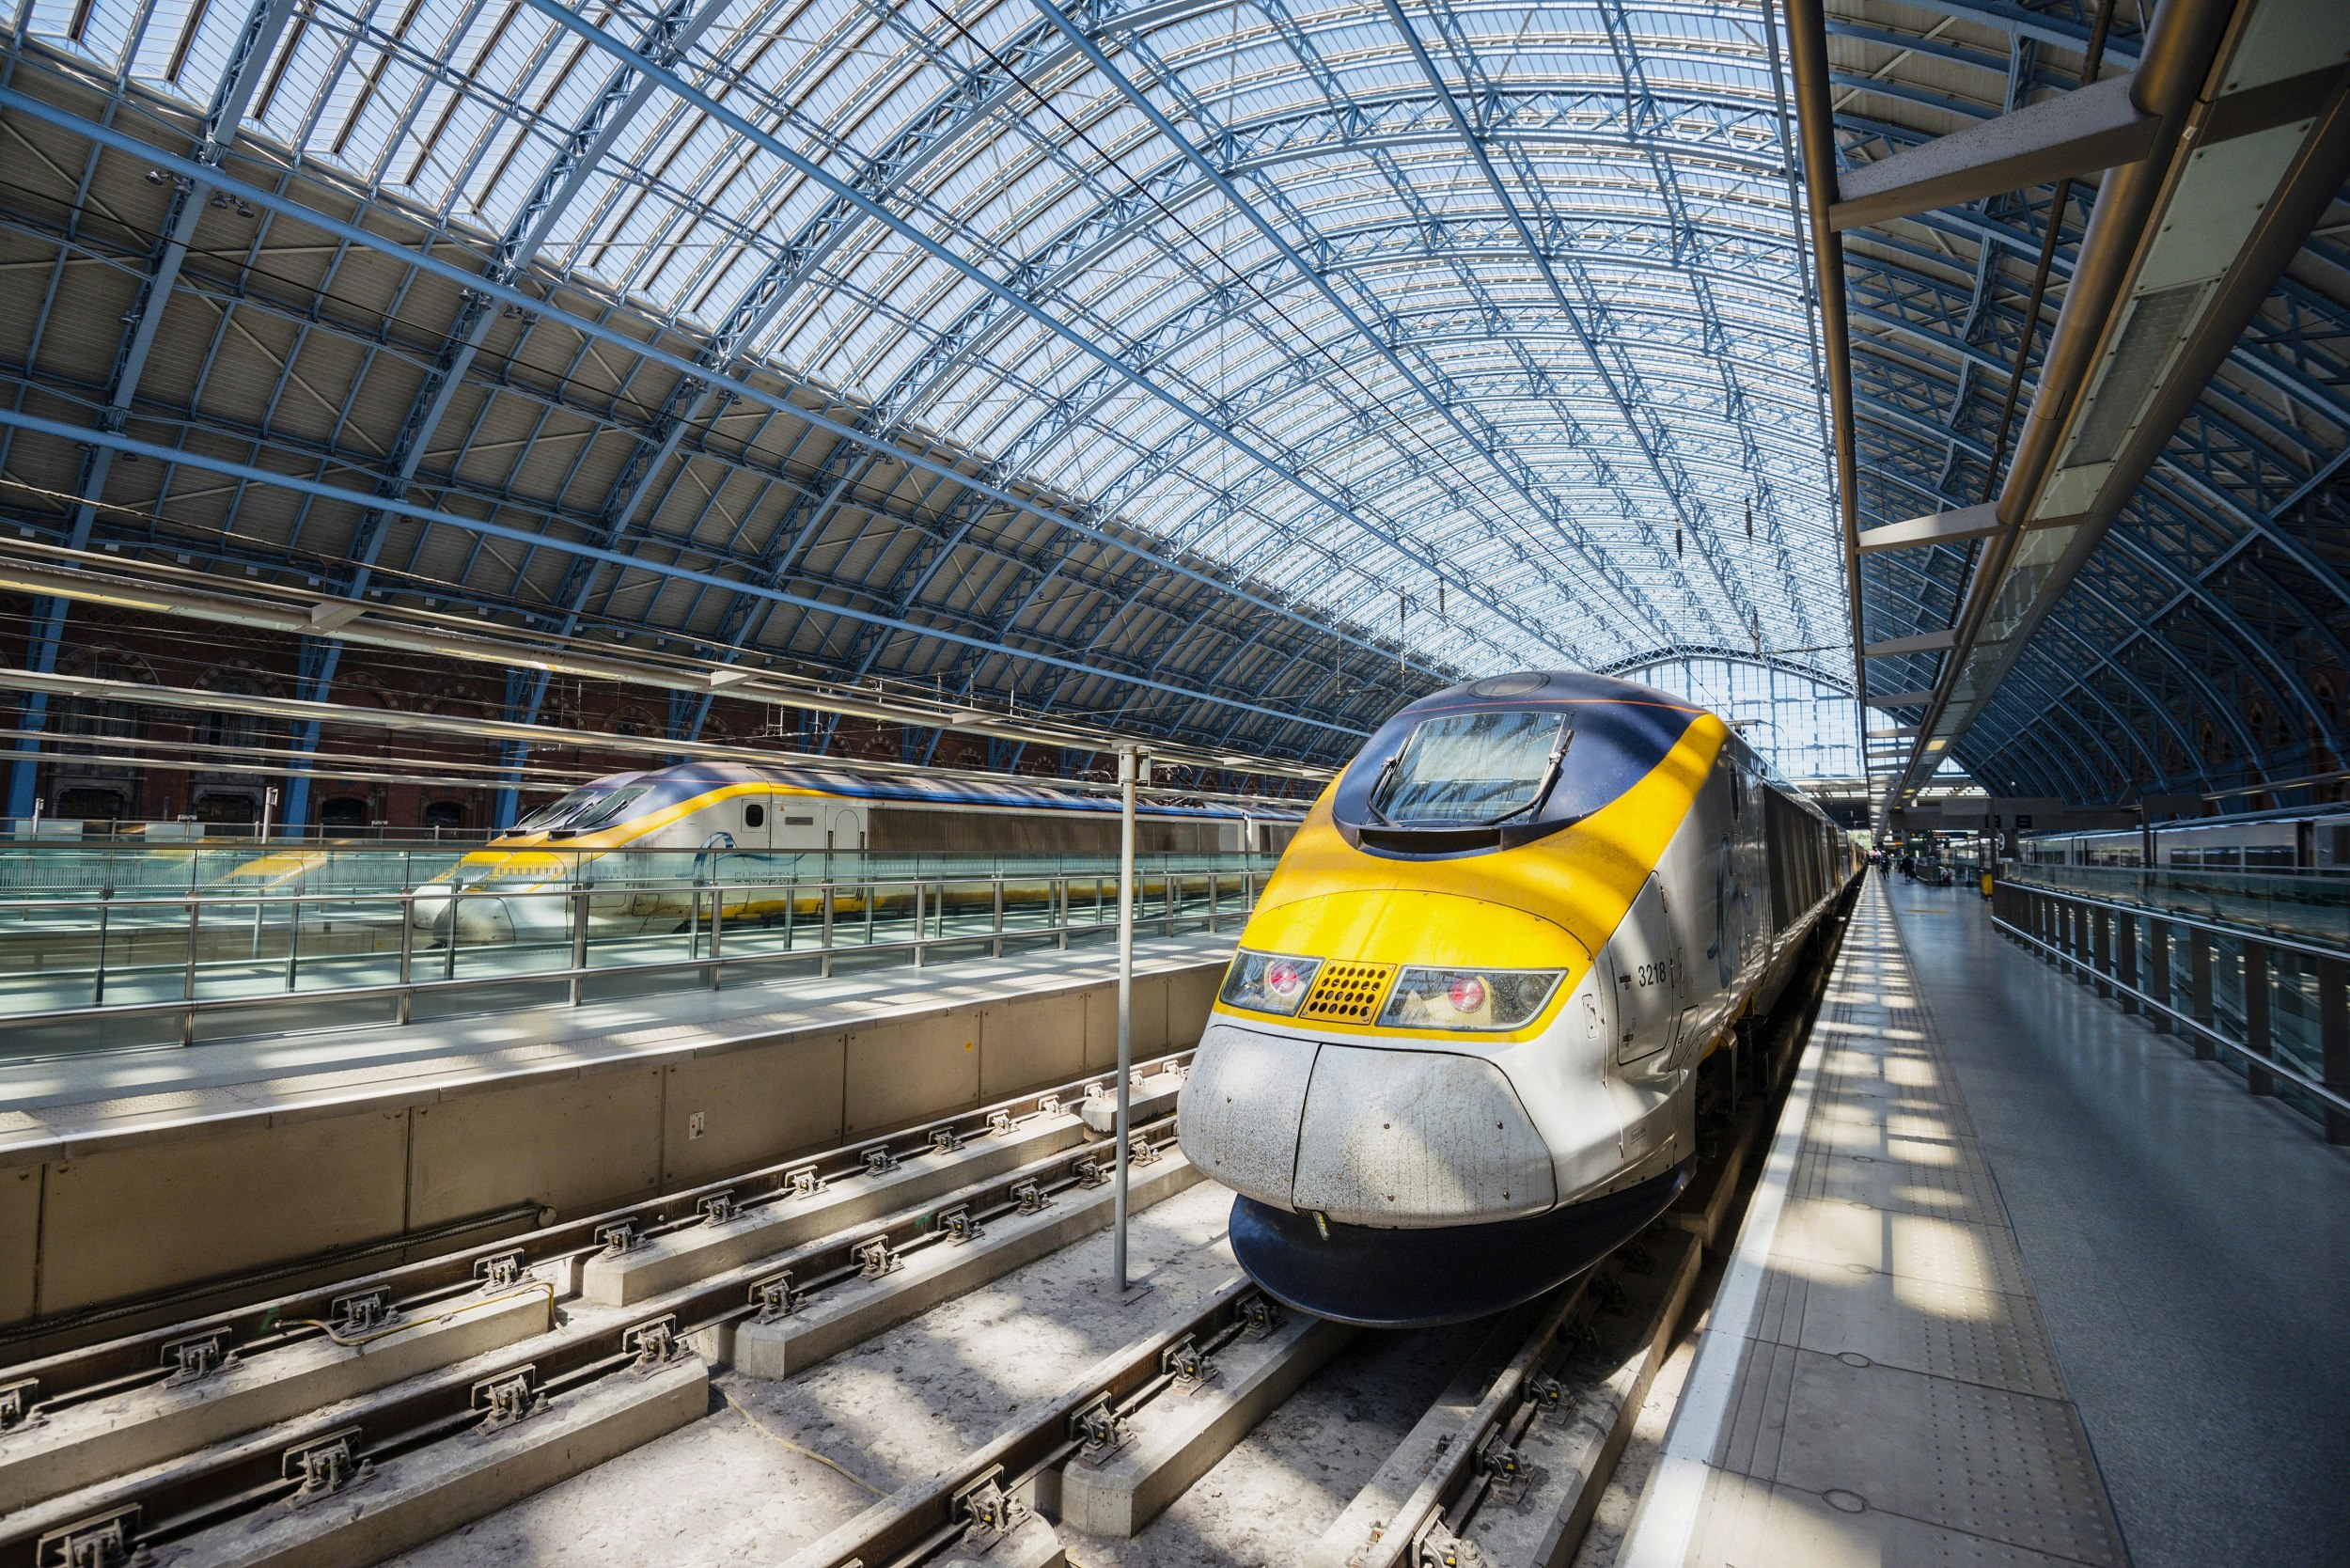 A Eurostar train at St Pancras station in London, with an arched glass and steel roof above